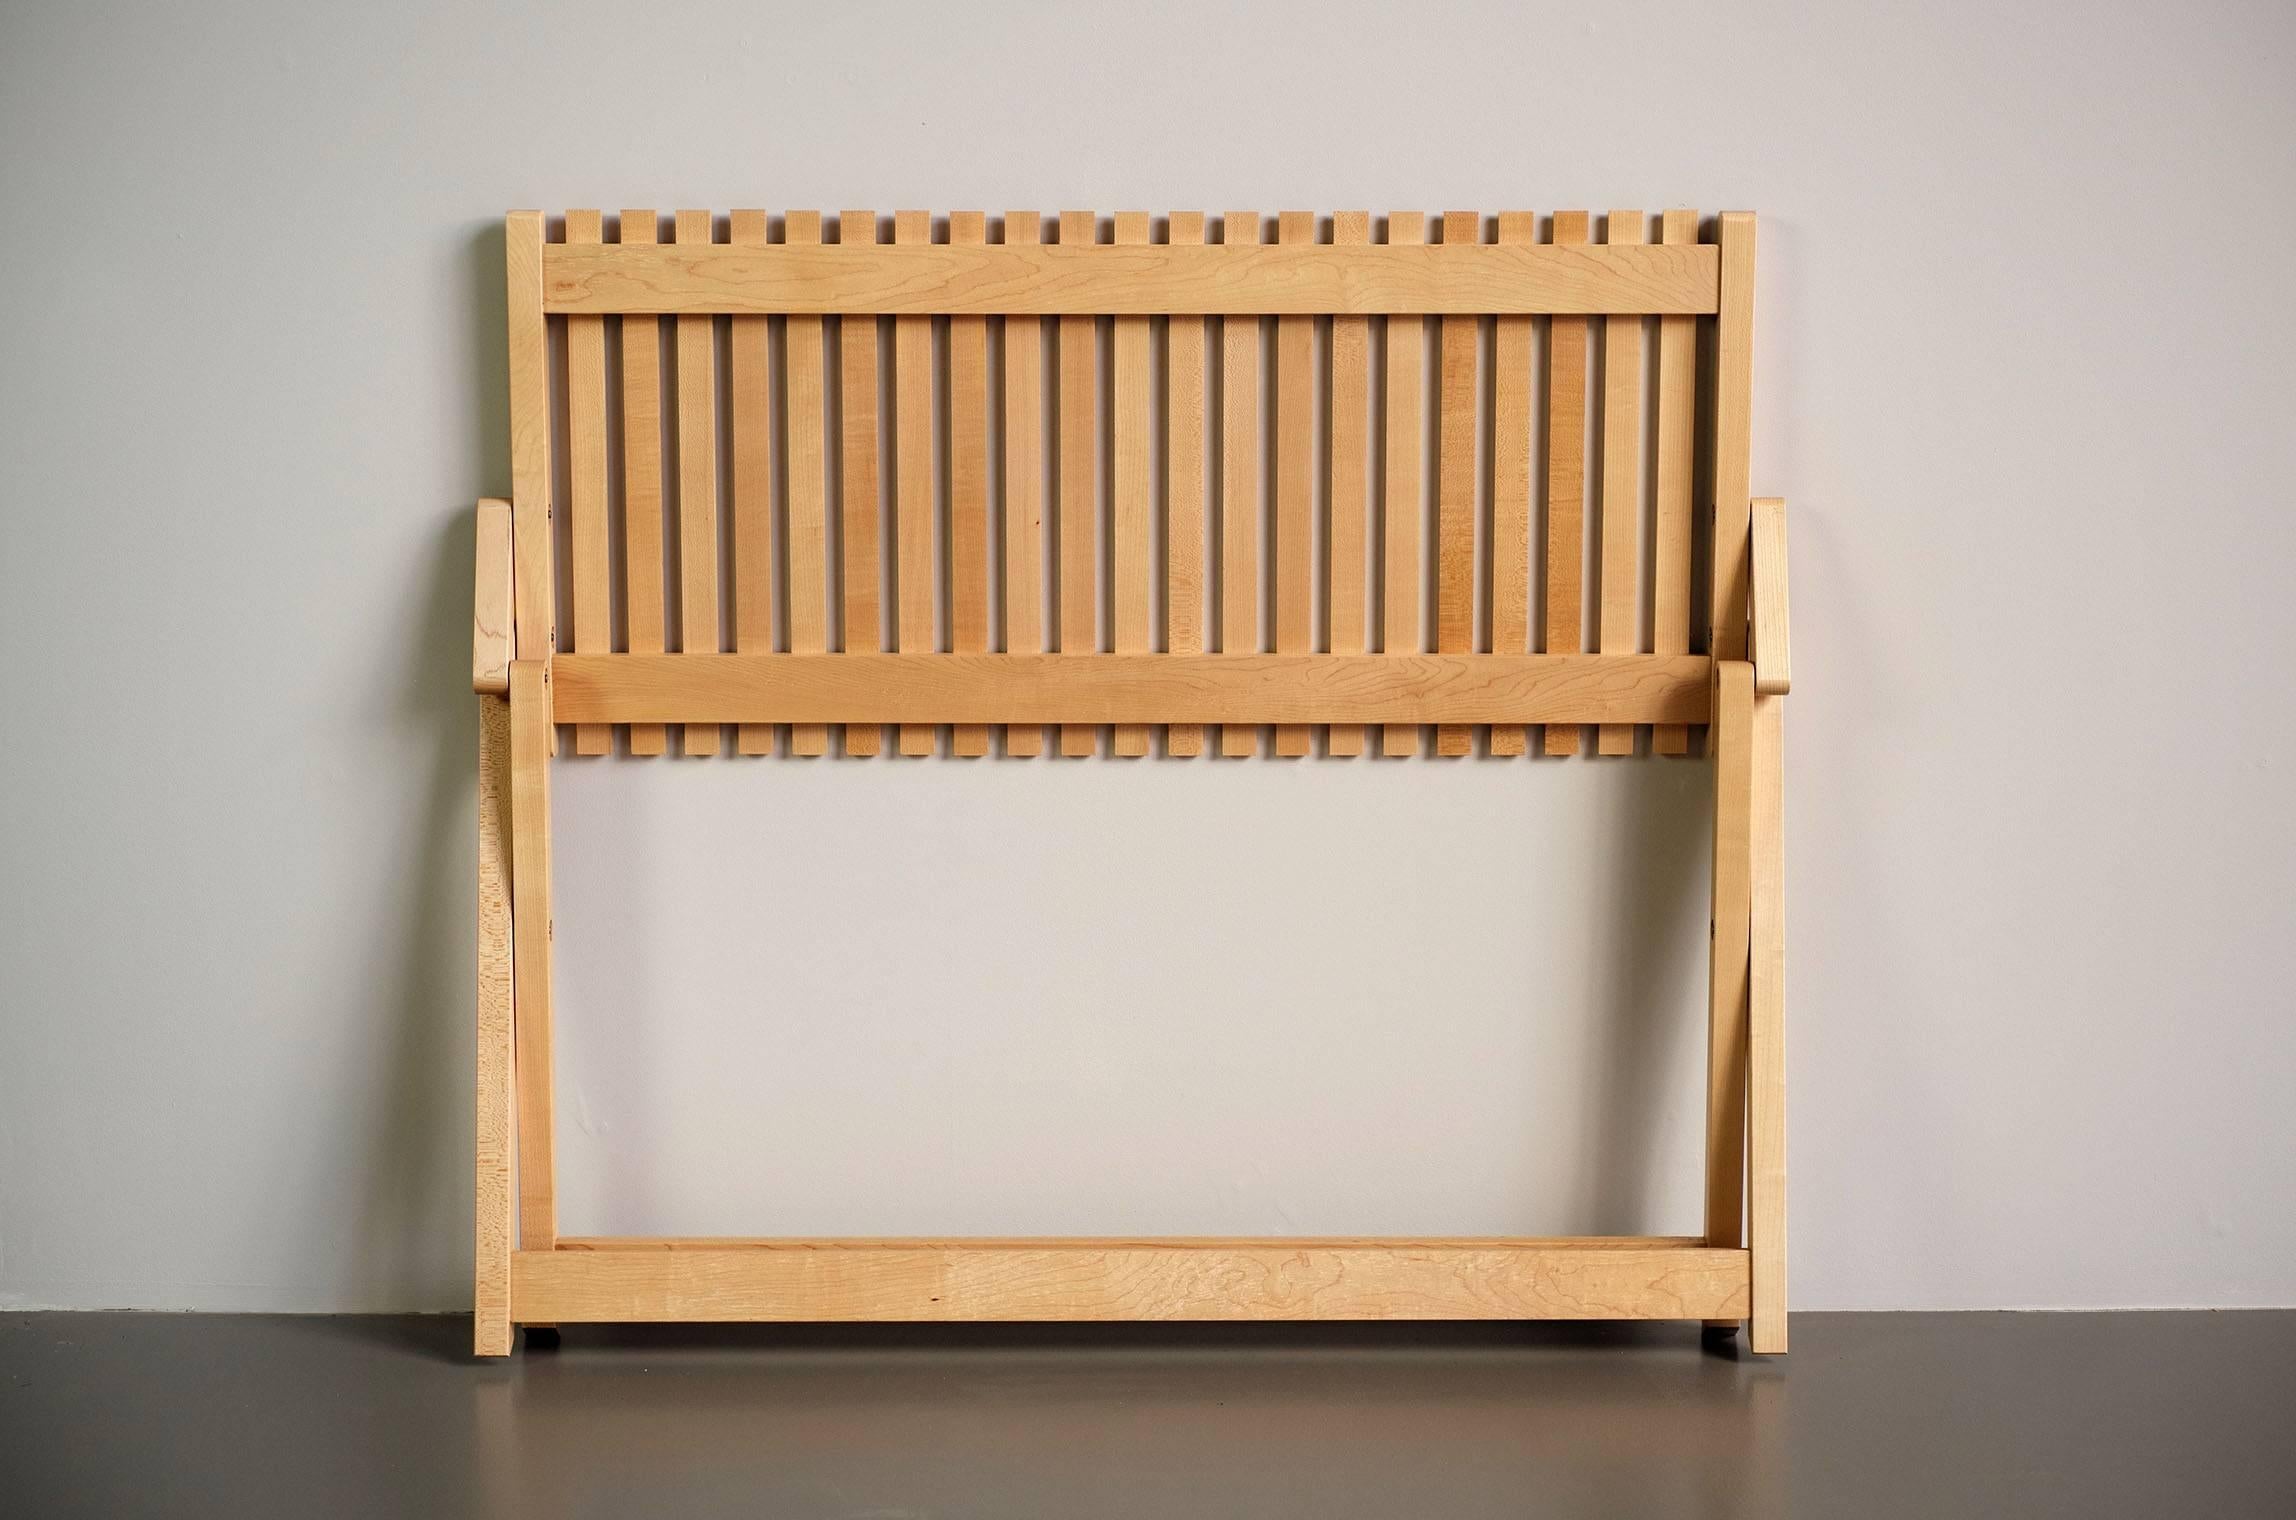 Jean-Claude Duboys, A5 Folding Maple Bench, France, 1980 In Good Condition For Sale In Catonvielle, FR